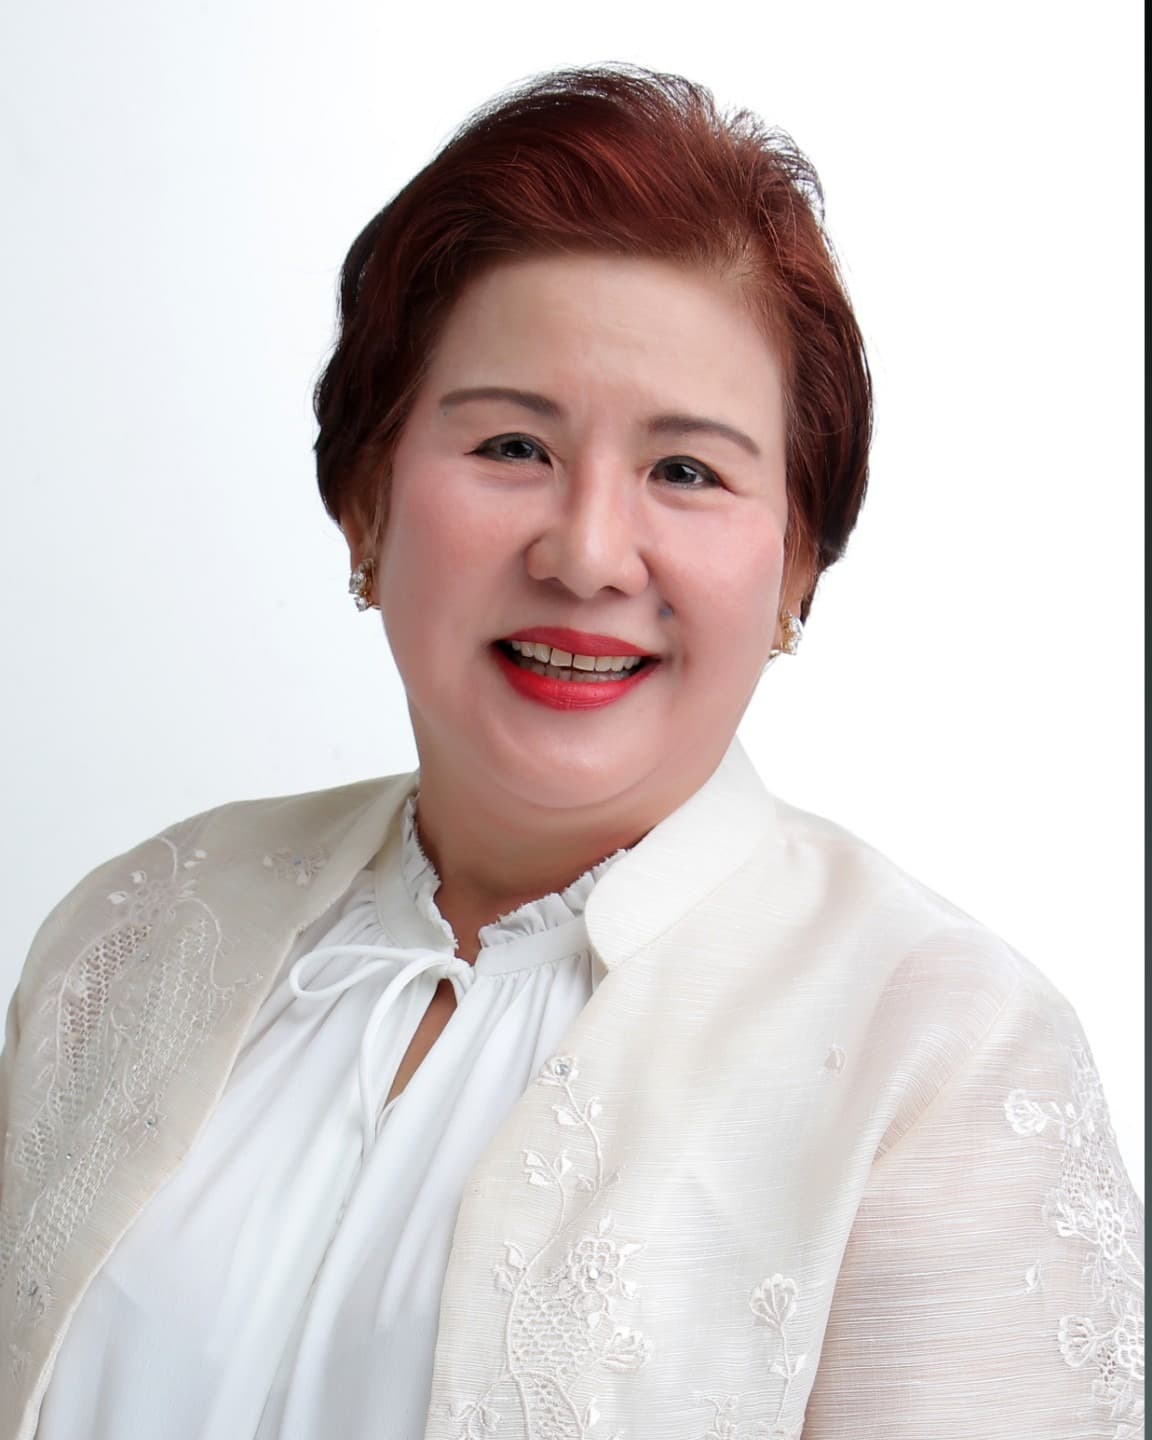 Mangio takes helm of PCCI, New prexy vows to strengthen PPP under her leadership